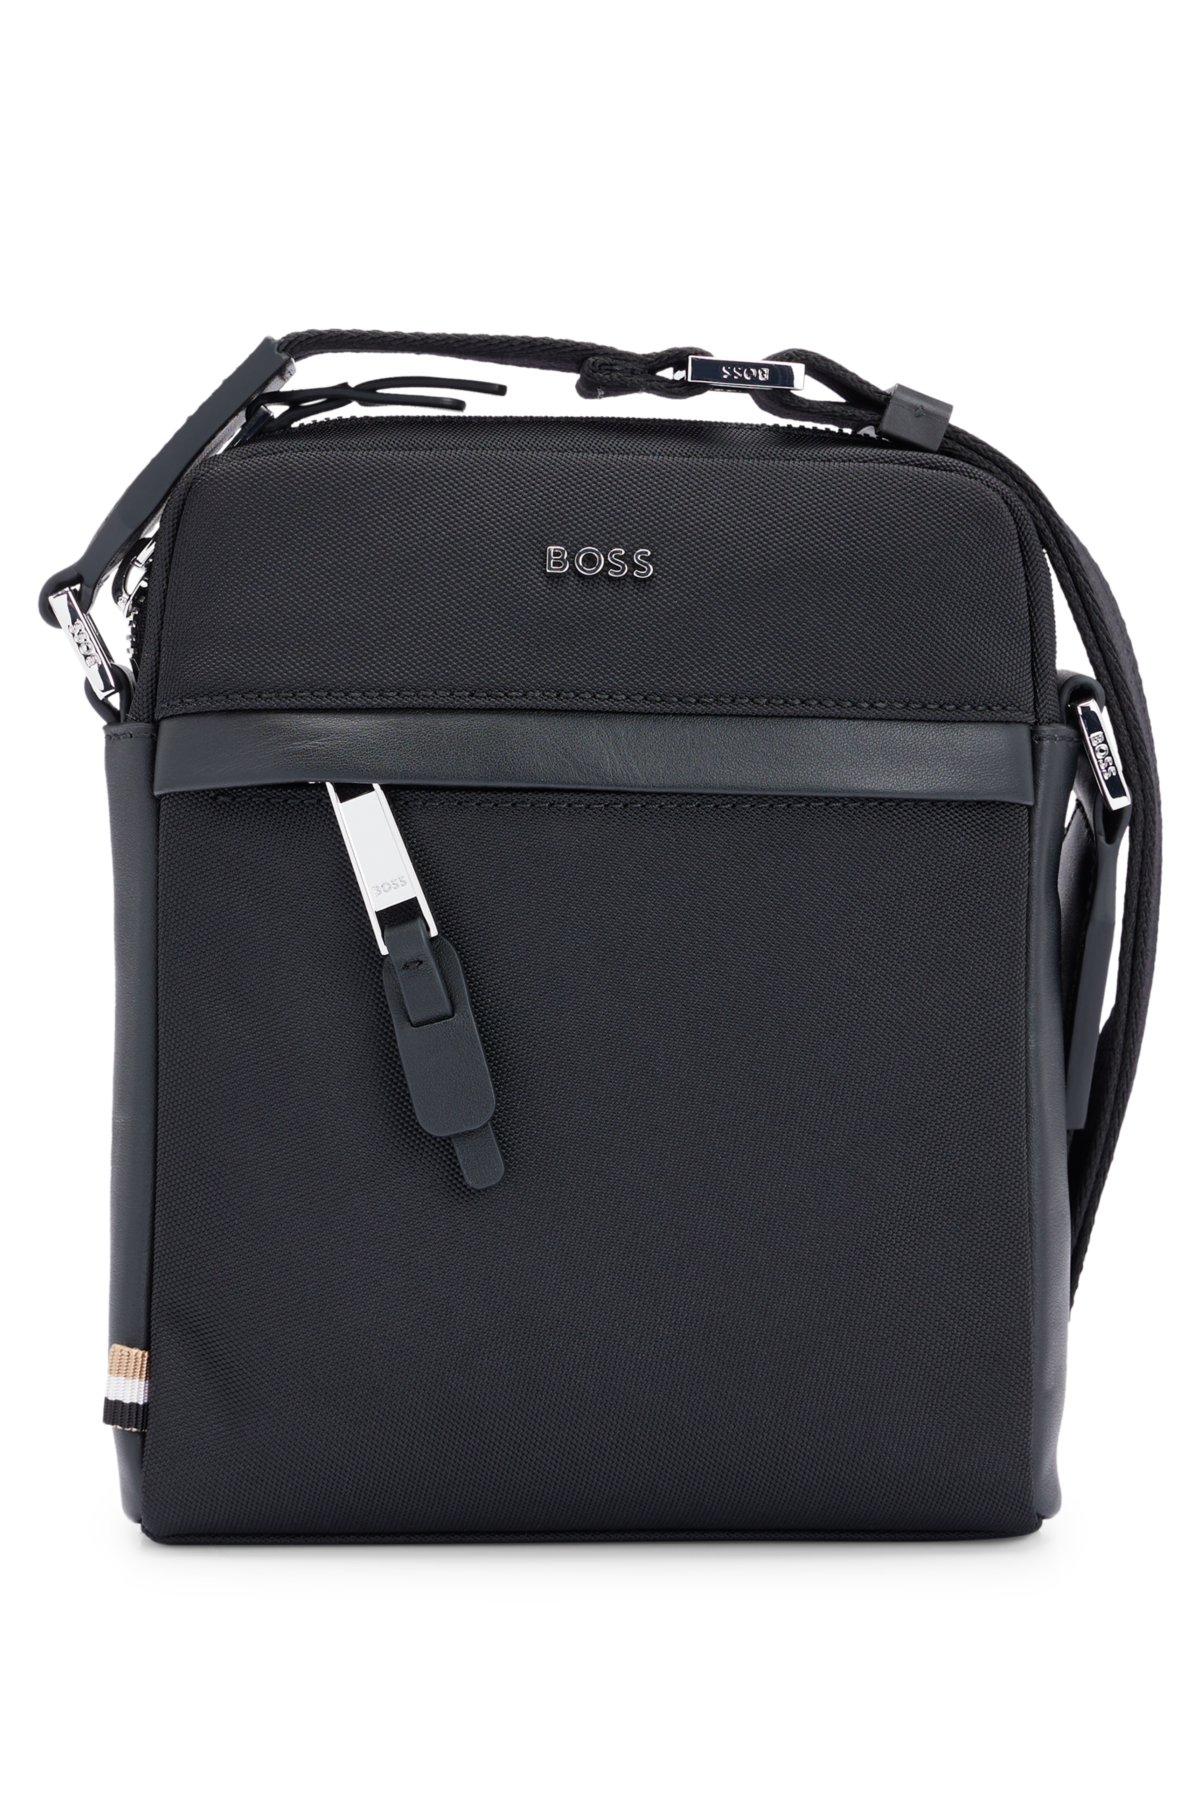 BOSS - Structured-material logo bag with lettering reporter